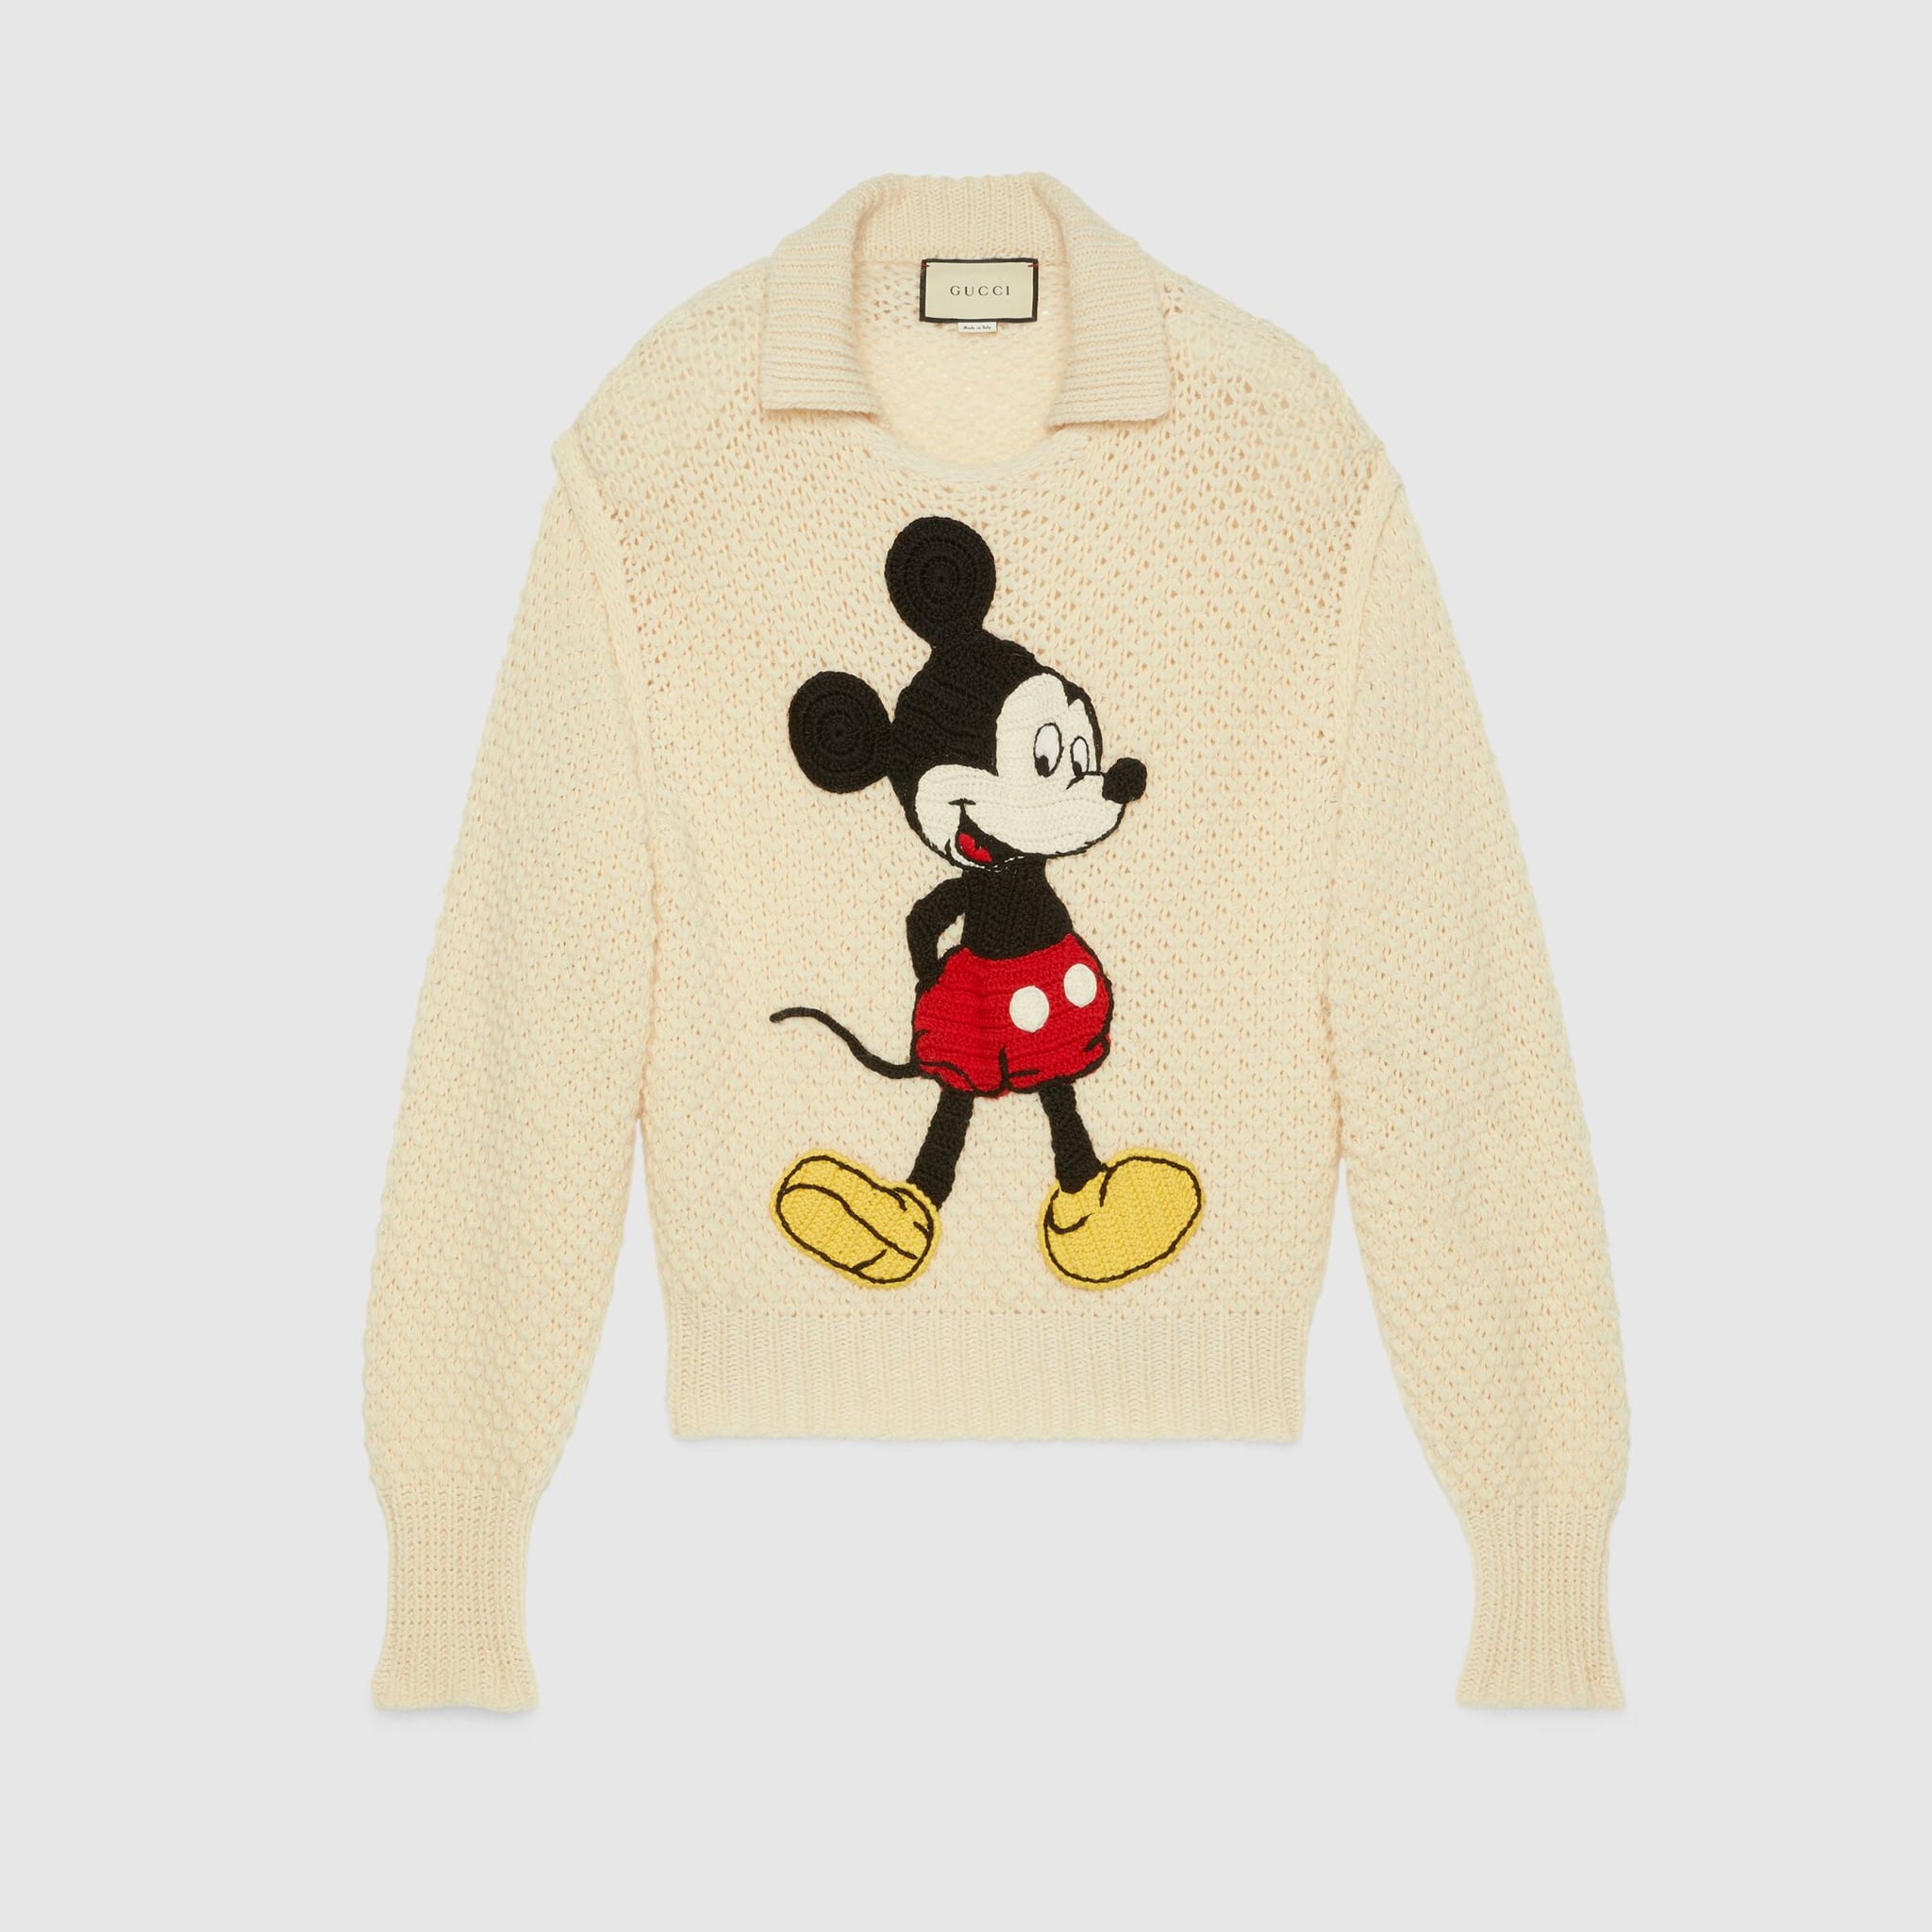 5 iconic Mickey Mouse fashion collaborations, from Gucci to Supreme